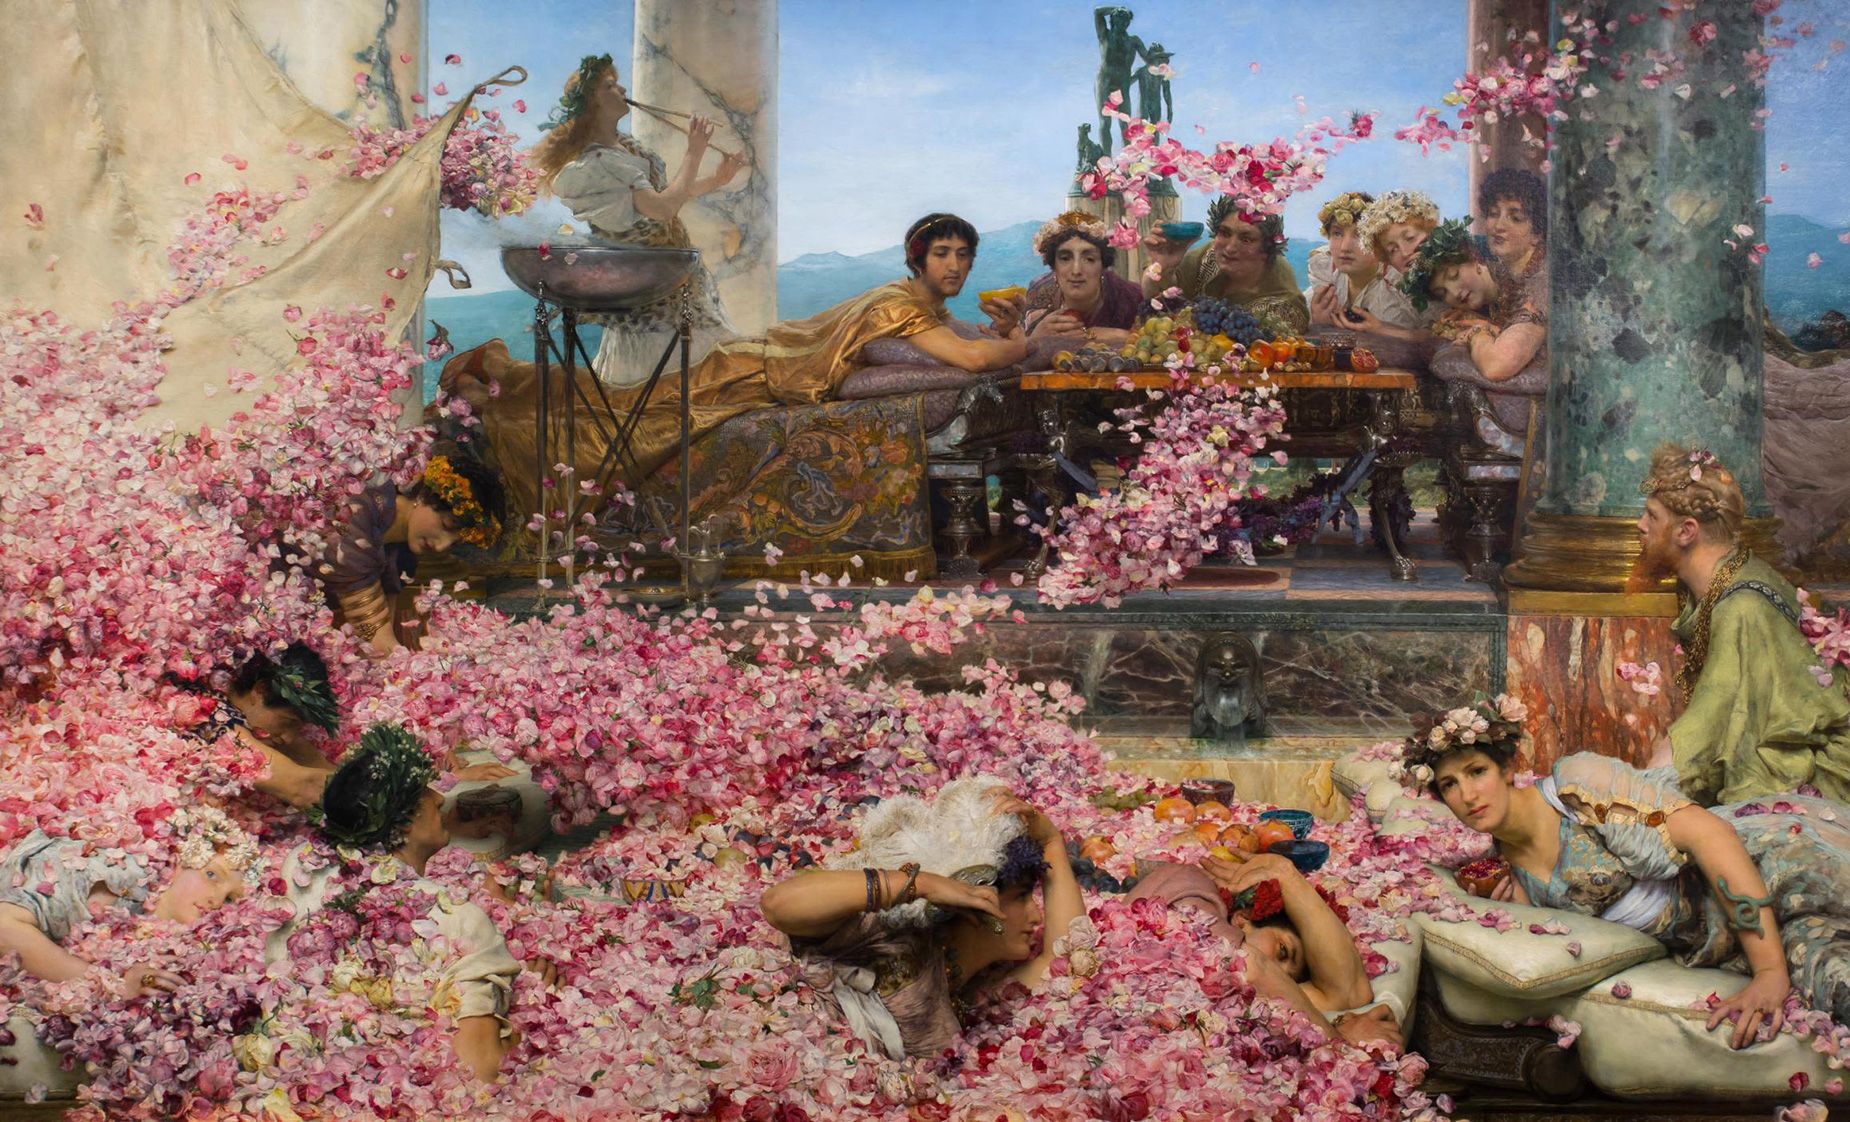 "The Roses of Heliogabalus" by Lawrence Alma-Tadema (1888) illustrating celestial Roman diners at a banquet.